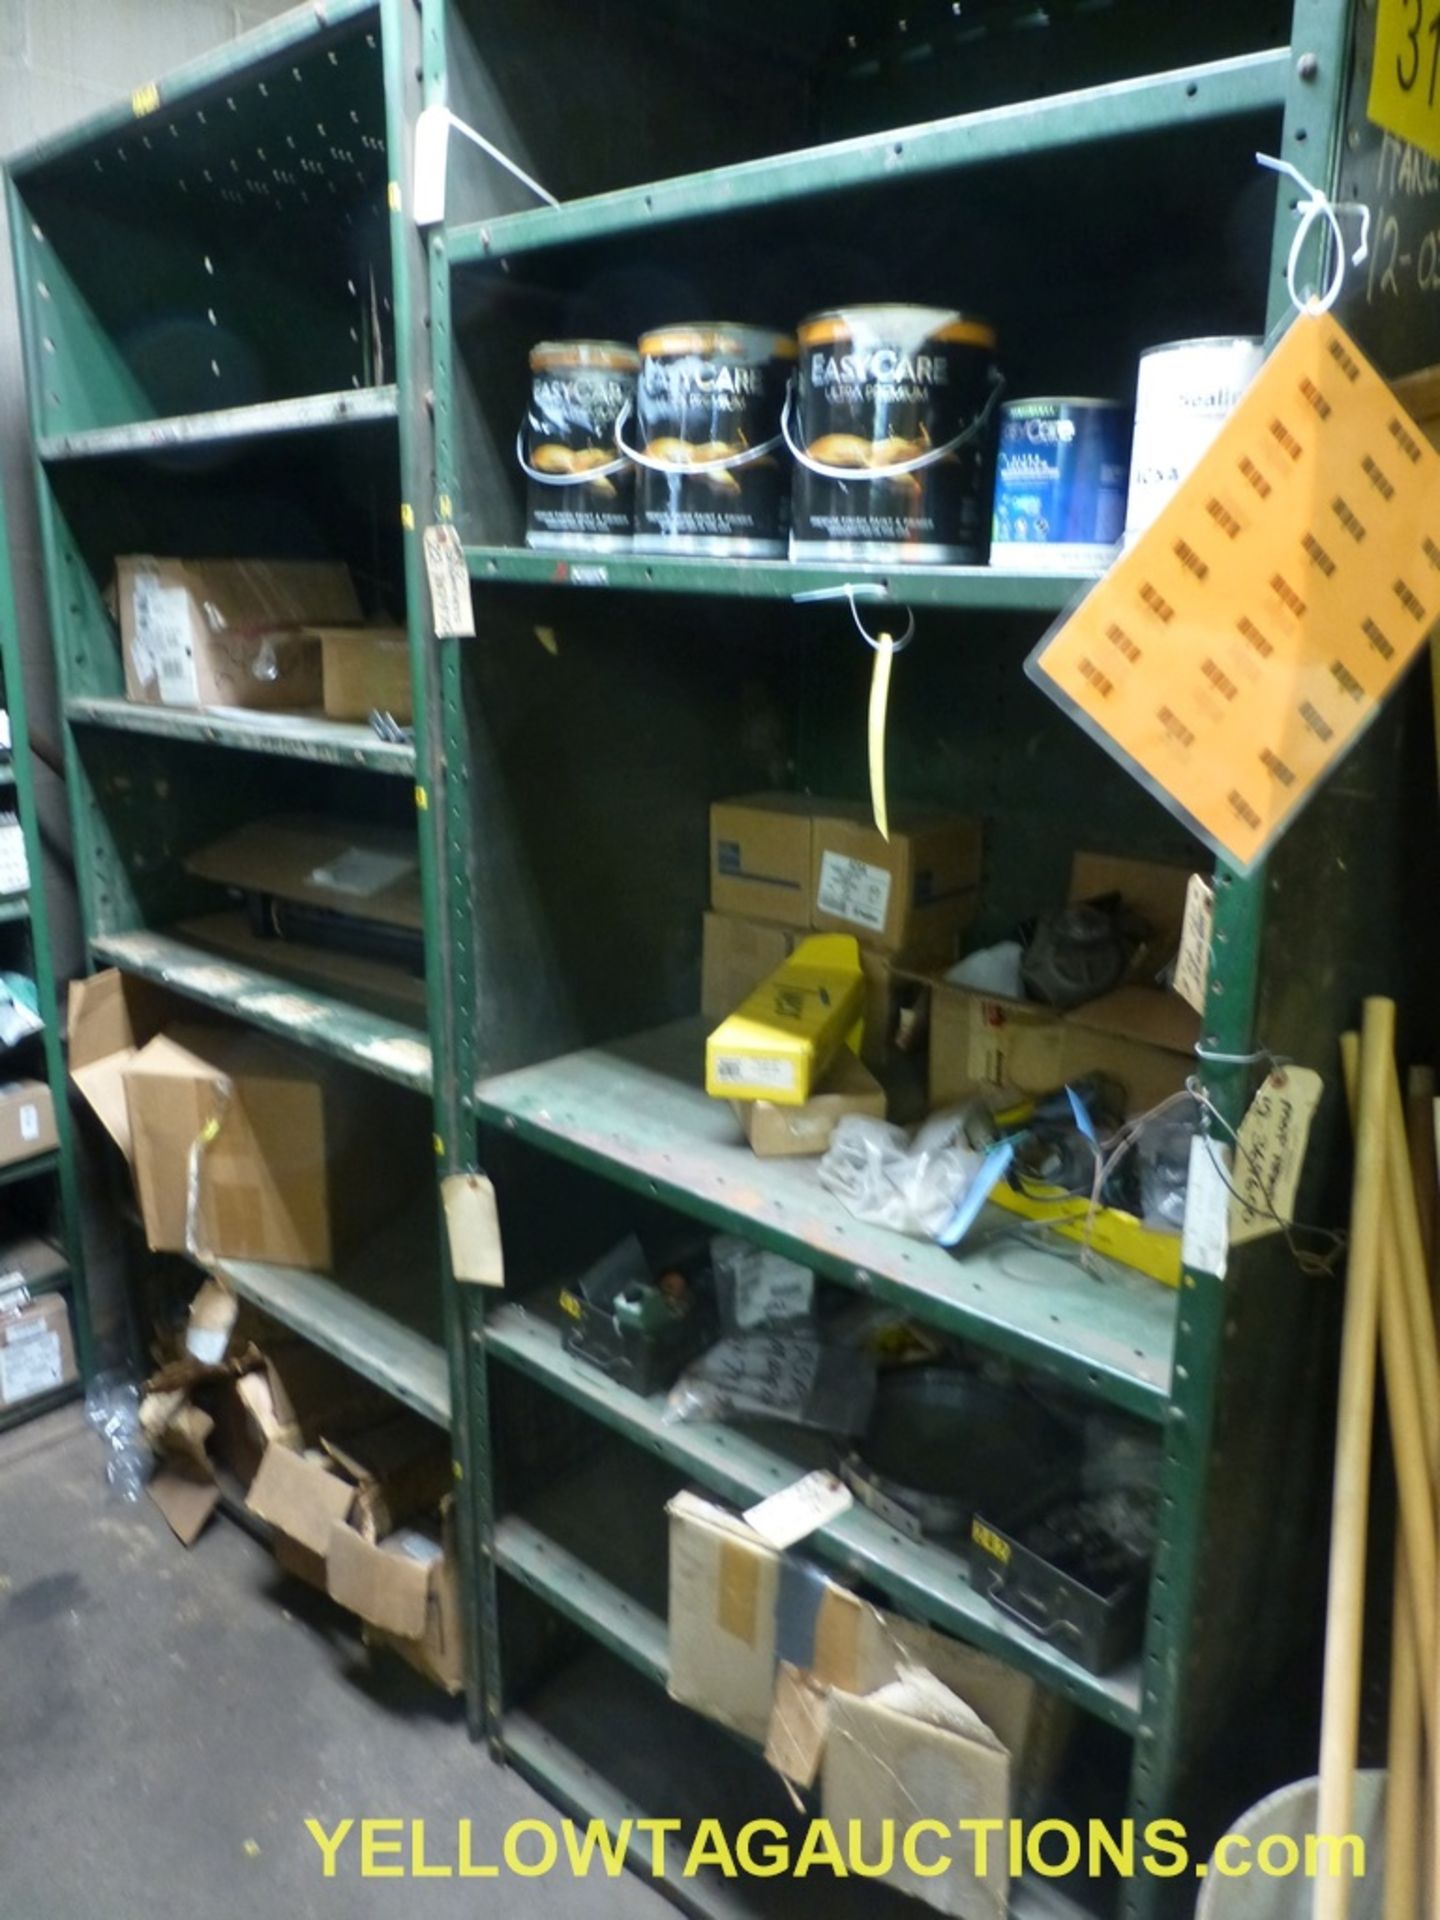 Shelves w/Contents | Includees:; Easy Care Paint; Kwiko Sealing Cement Asbestos Free; Pneumatic Pump